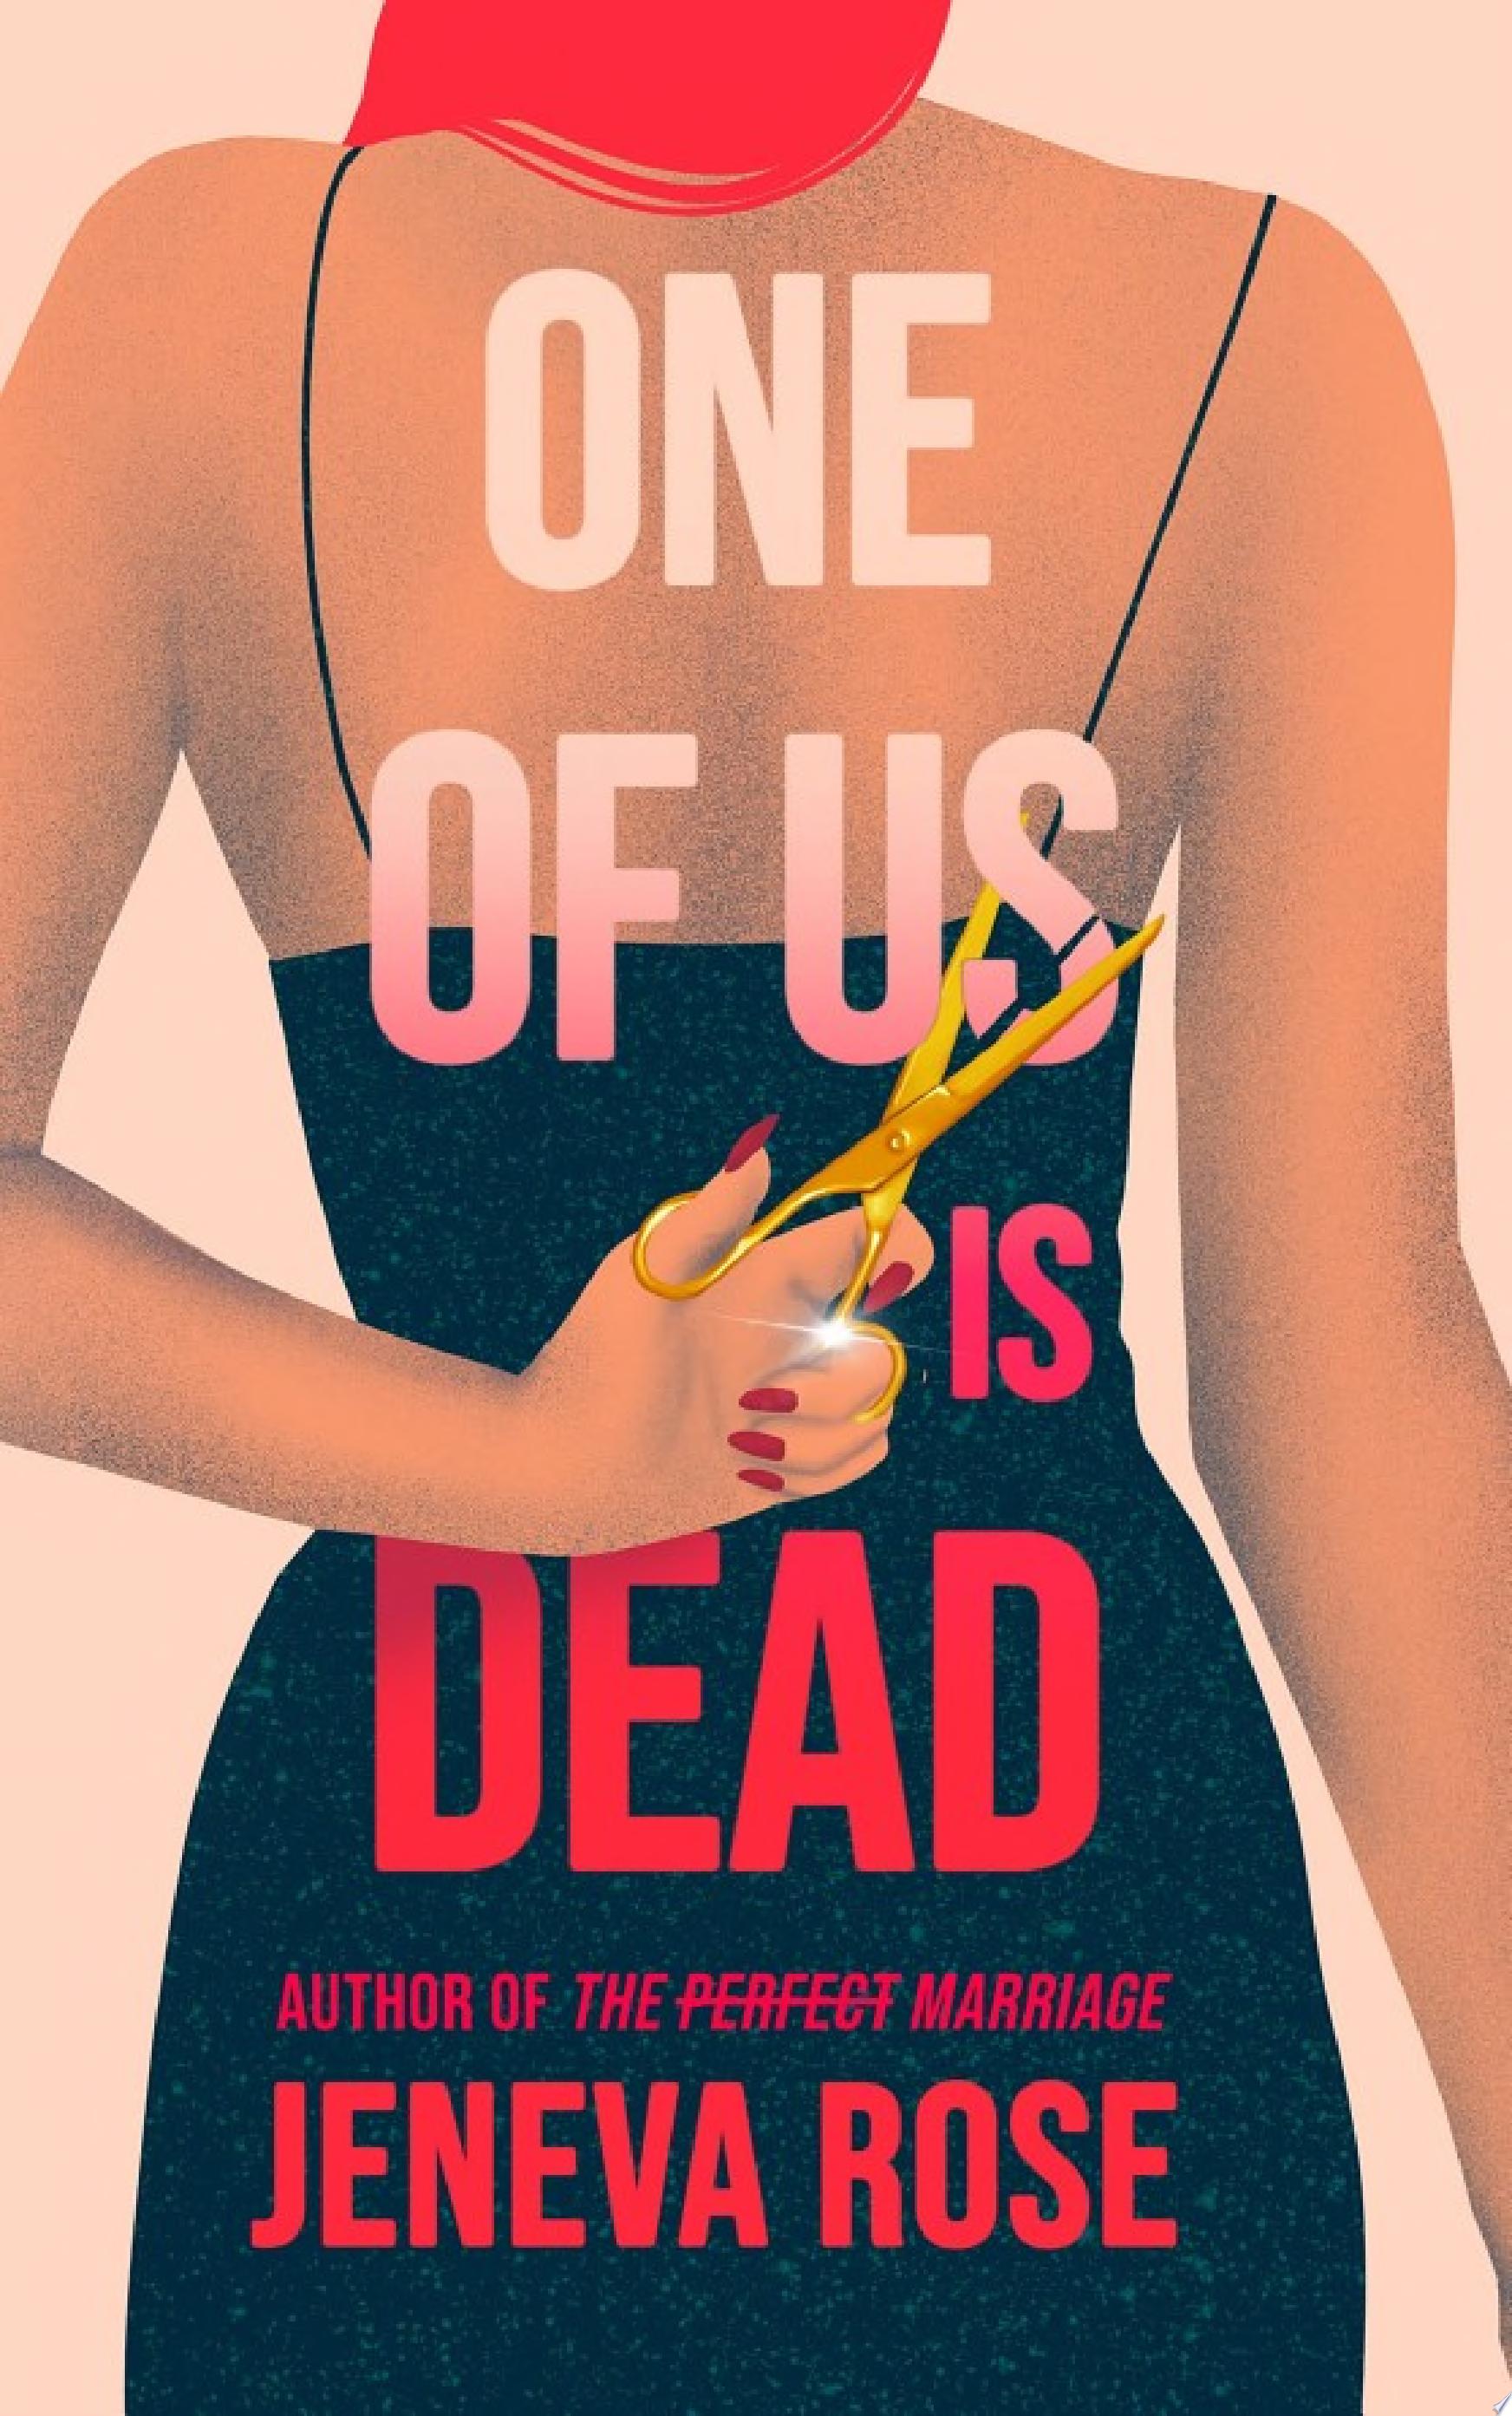 Image for "One of Us Is Dead"